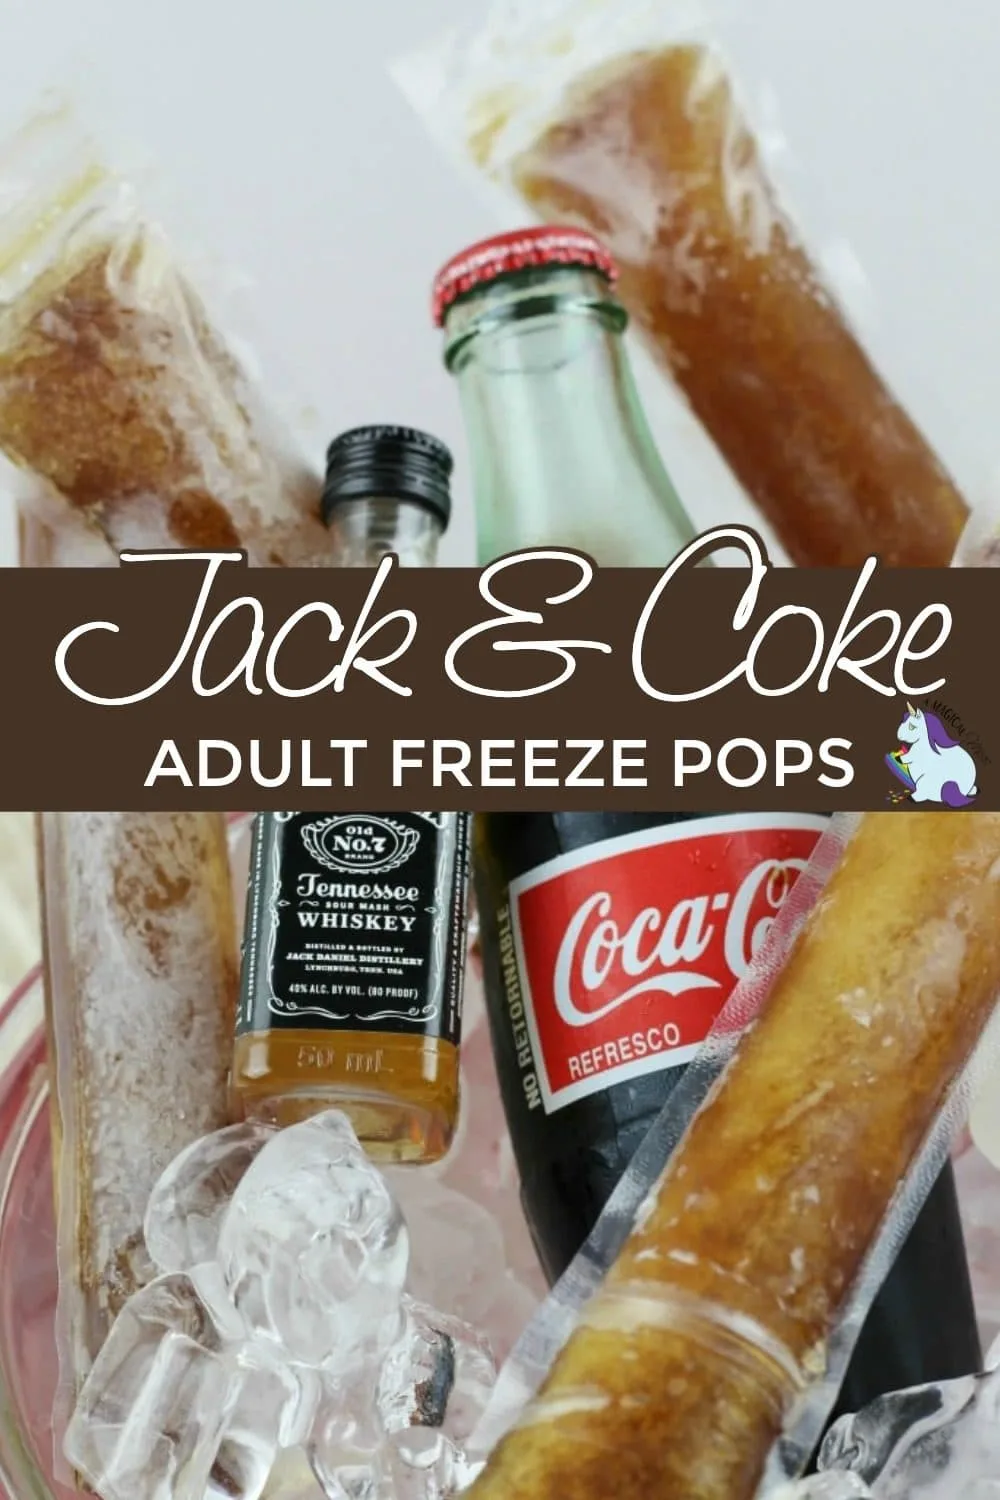 Adult freeze pops in a bowl of ice with a bottle of Coke and Jack Daniels.